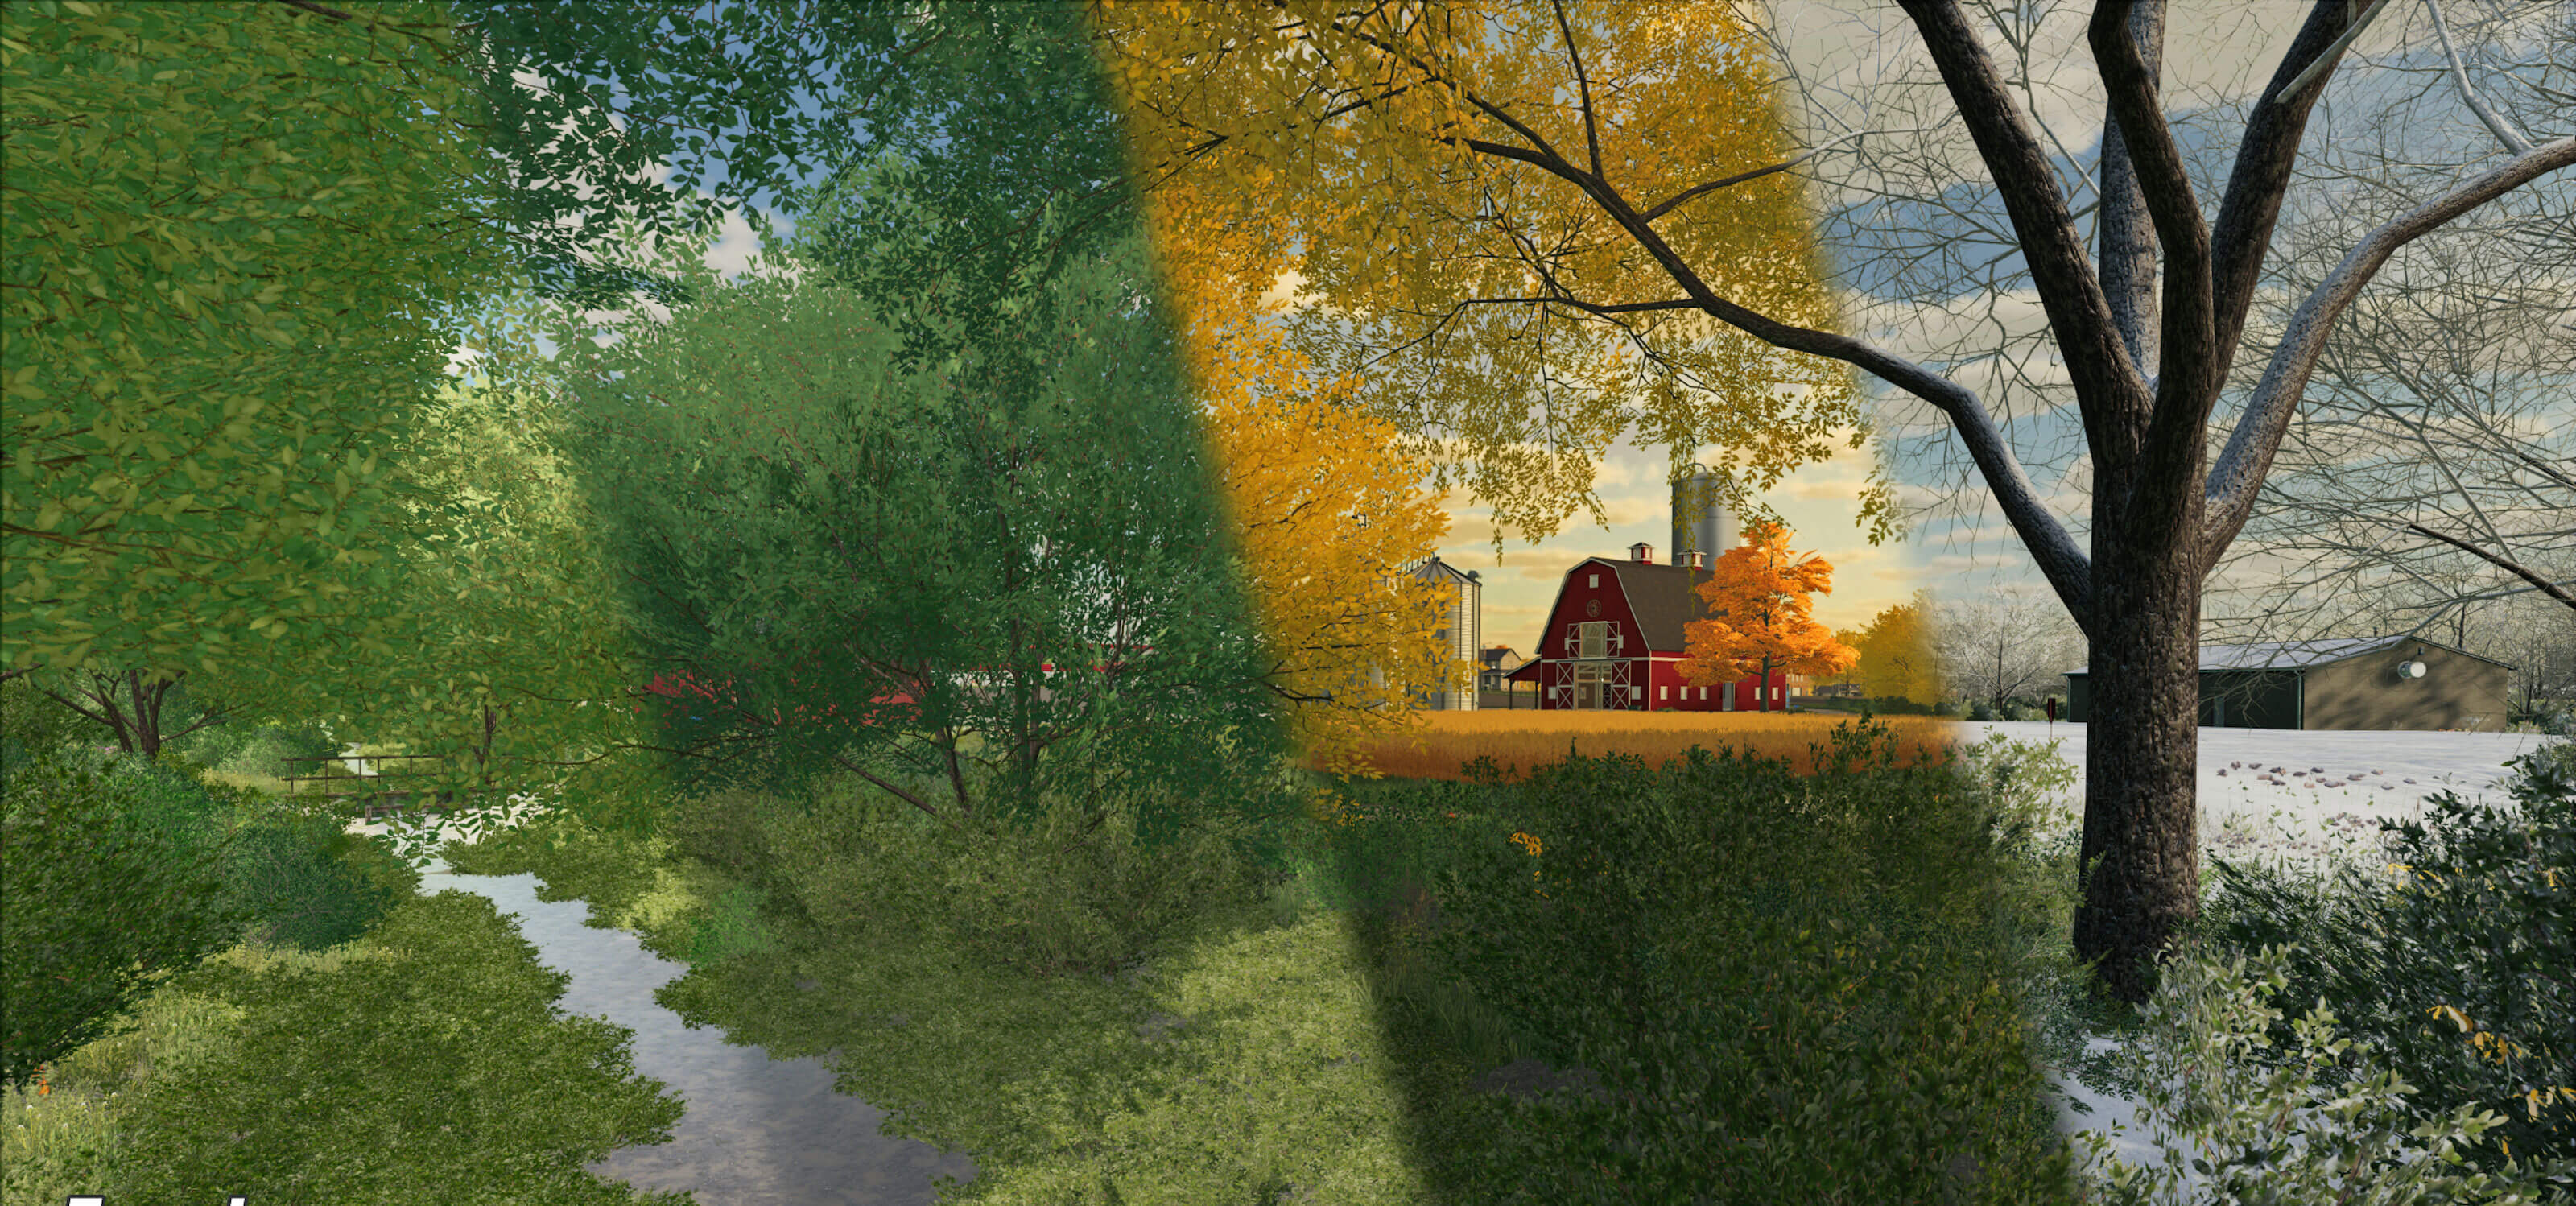 Four separate in-game panels showing different seasons of nature inside Farming Simulator 22